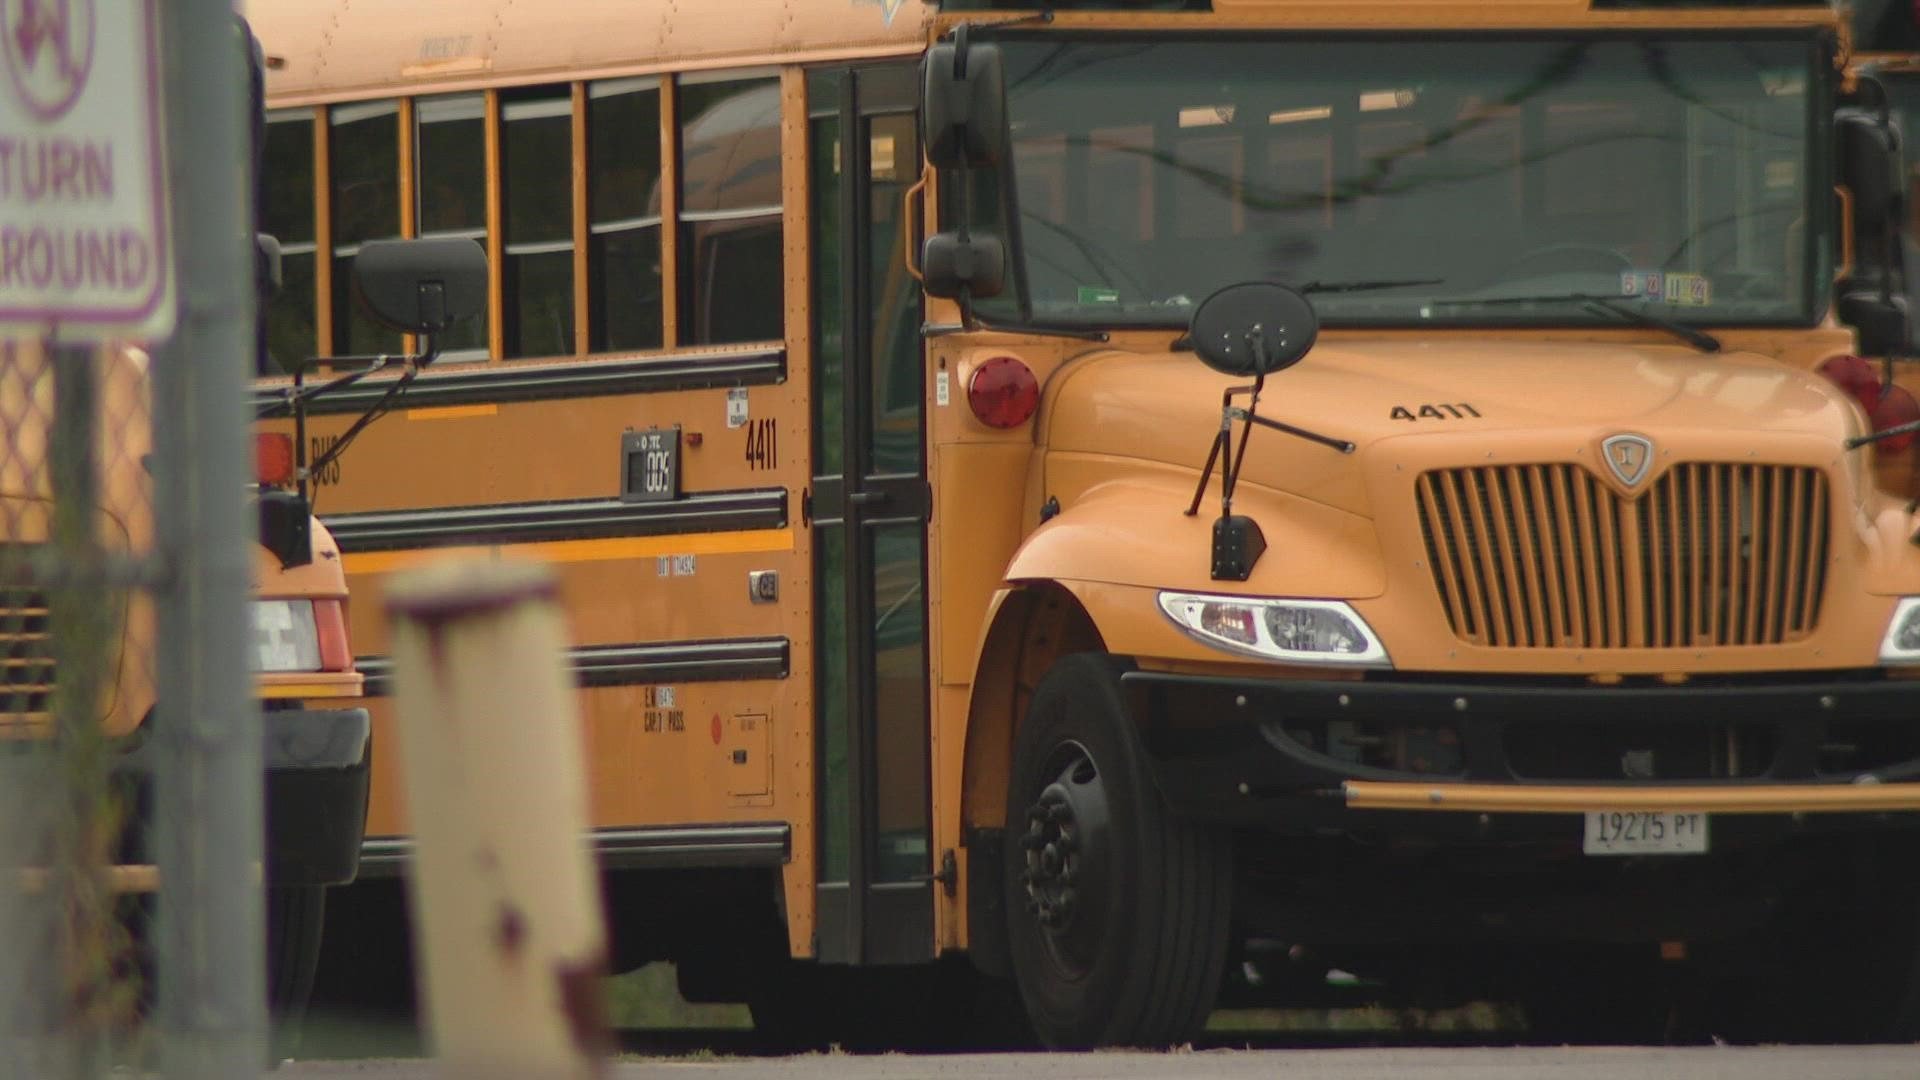 A bus driver shortage has led to SLPS officials to shorten the school day for some schools in the district. The schedule changes will allow for 10 more bus routes.